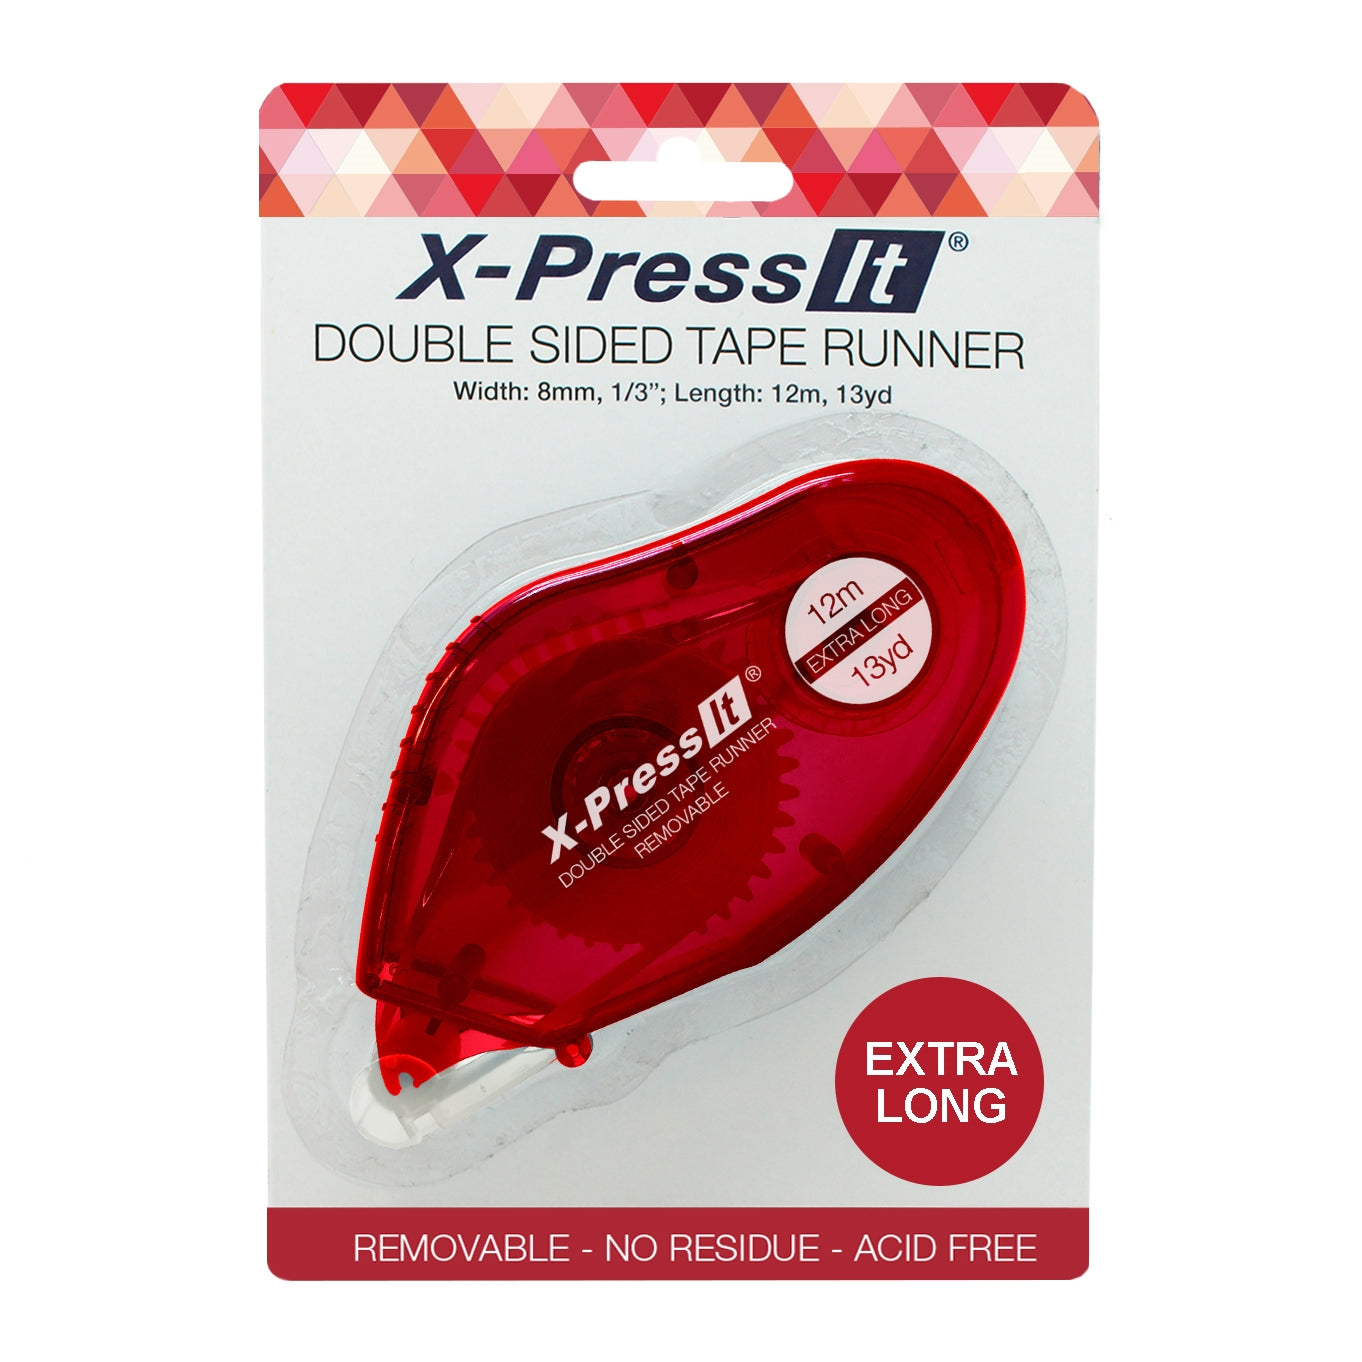 X-Press It Double Sided Tape Runner REMOVABLE 8mm x 12m